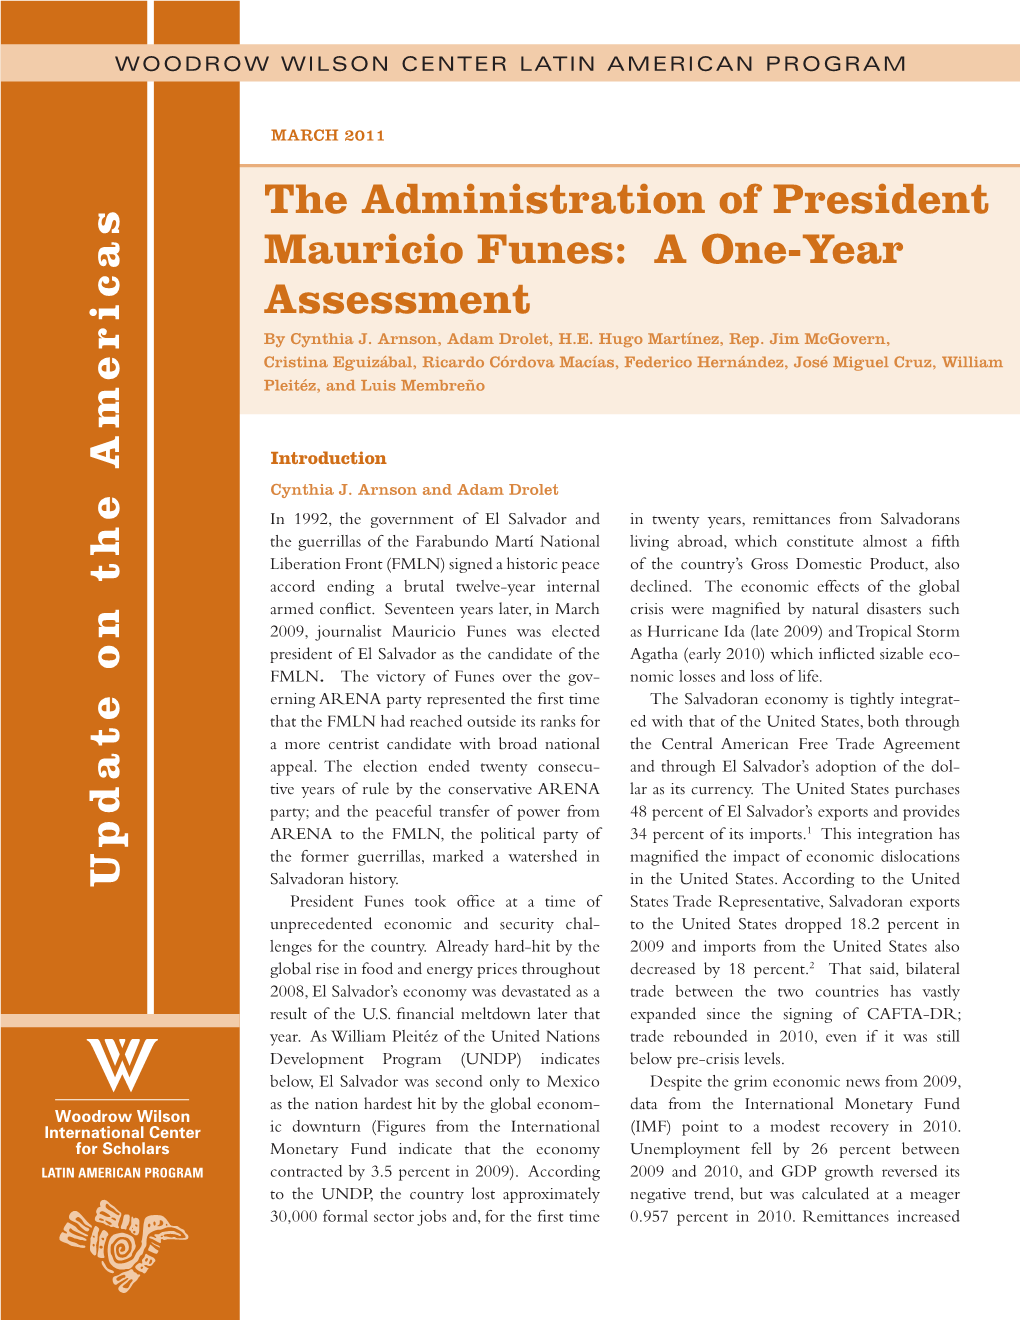 The Administration of President Mauricio Funes: a One-Year Assessment by Cynthia J